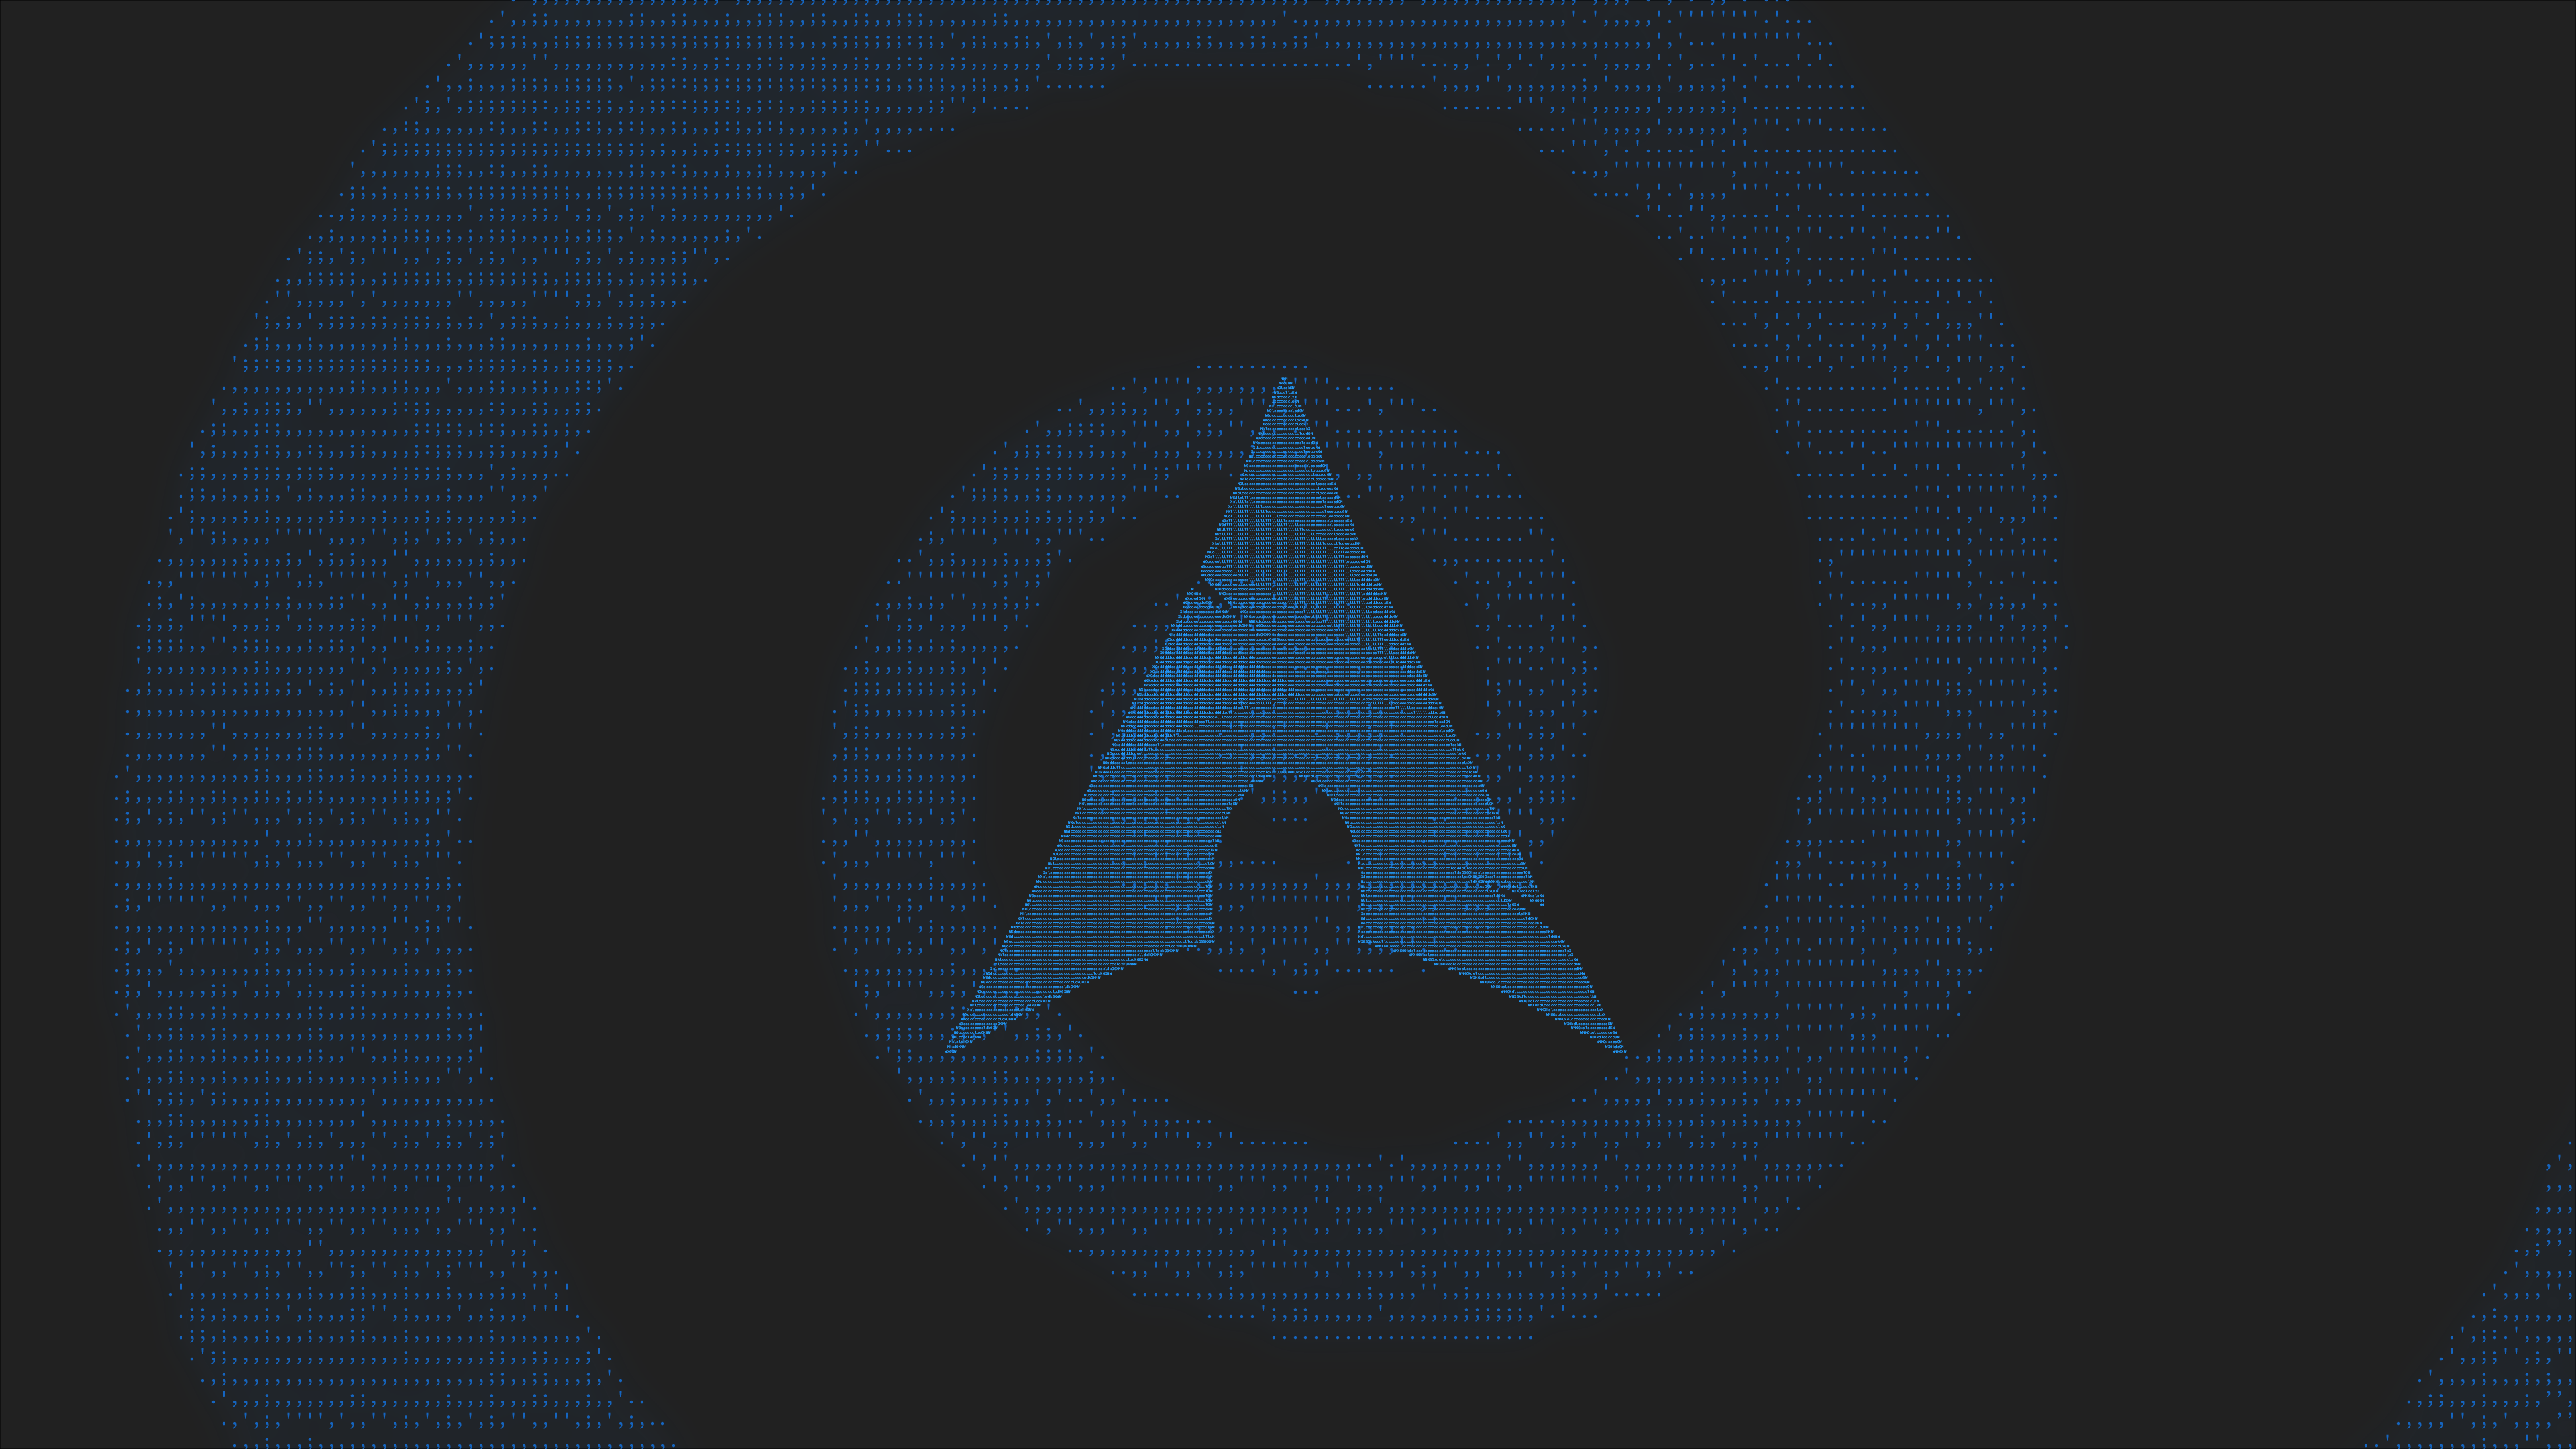 General 3840x2160 Arch Linux material minimal minimalism ASCII art neon glow text material style Linux